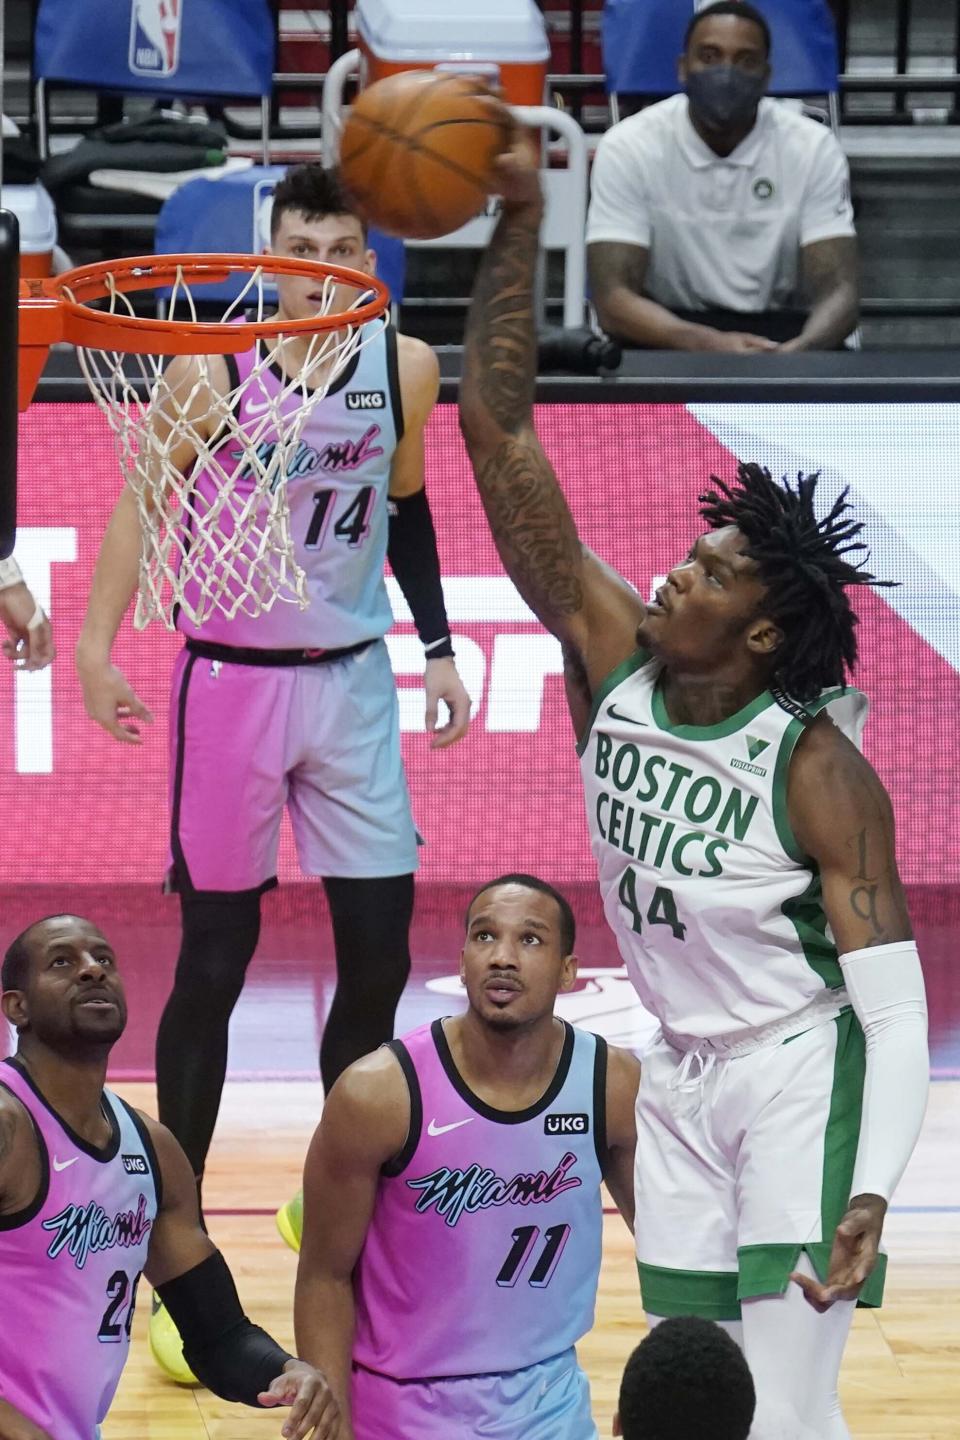 Boston Celtics center Robert Williams III (44) dunks the ball over Miami Heat guards Avery Bradley (11) and Andre Iguodala (28) during the second half of an NBA basketball game, Wednesday, Jan. 6, 2021, in Miami. (AP Photo/Marta Lavandier)